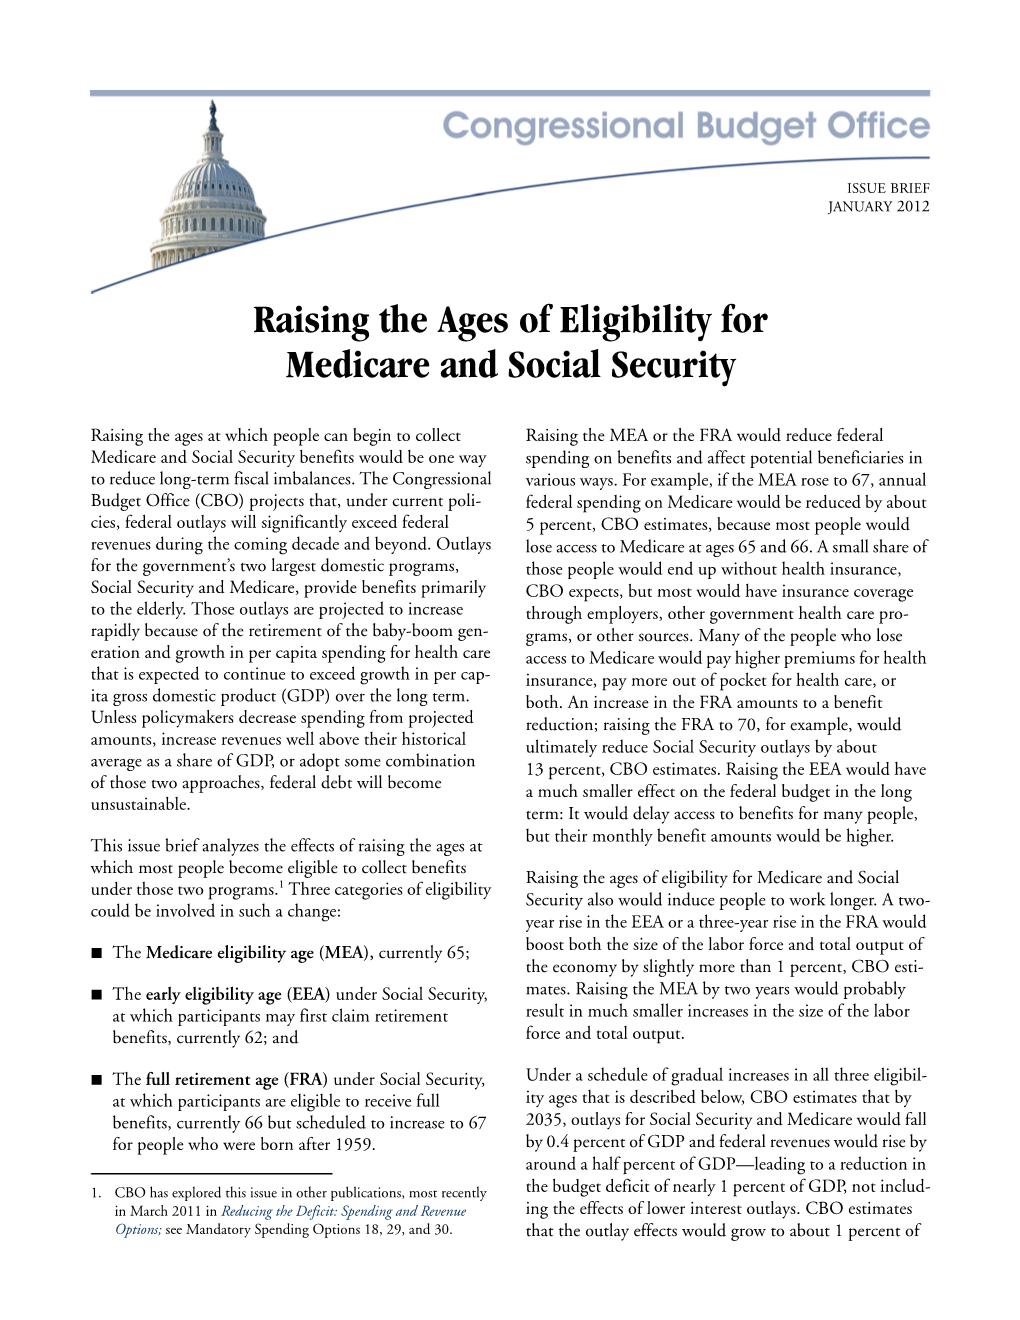 Raising the Ages of Eligibility for Medicare and Social Security